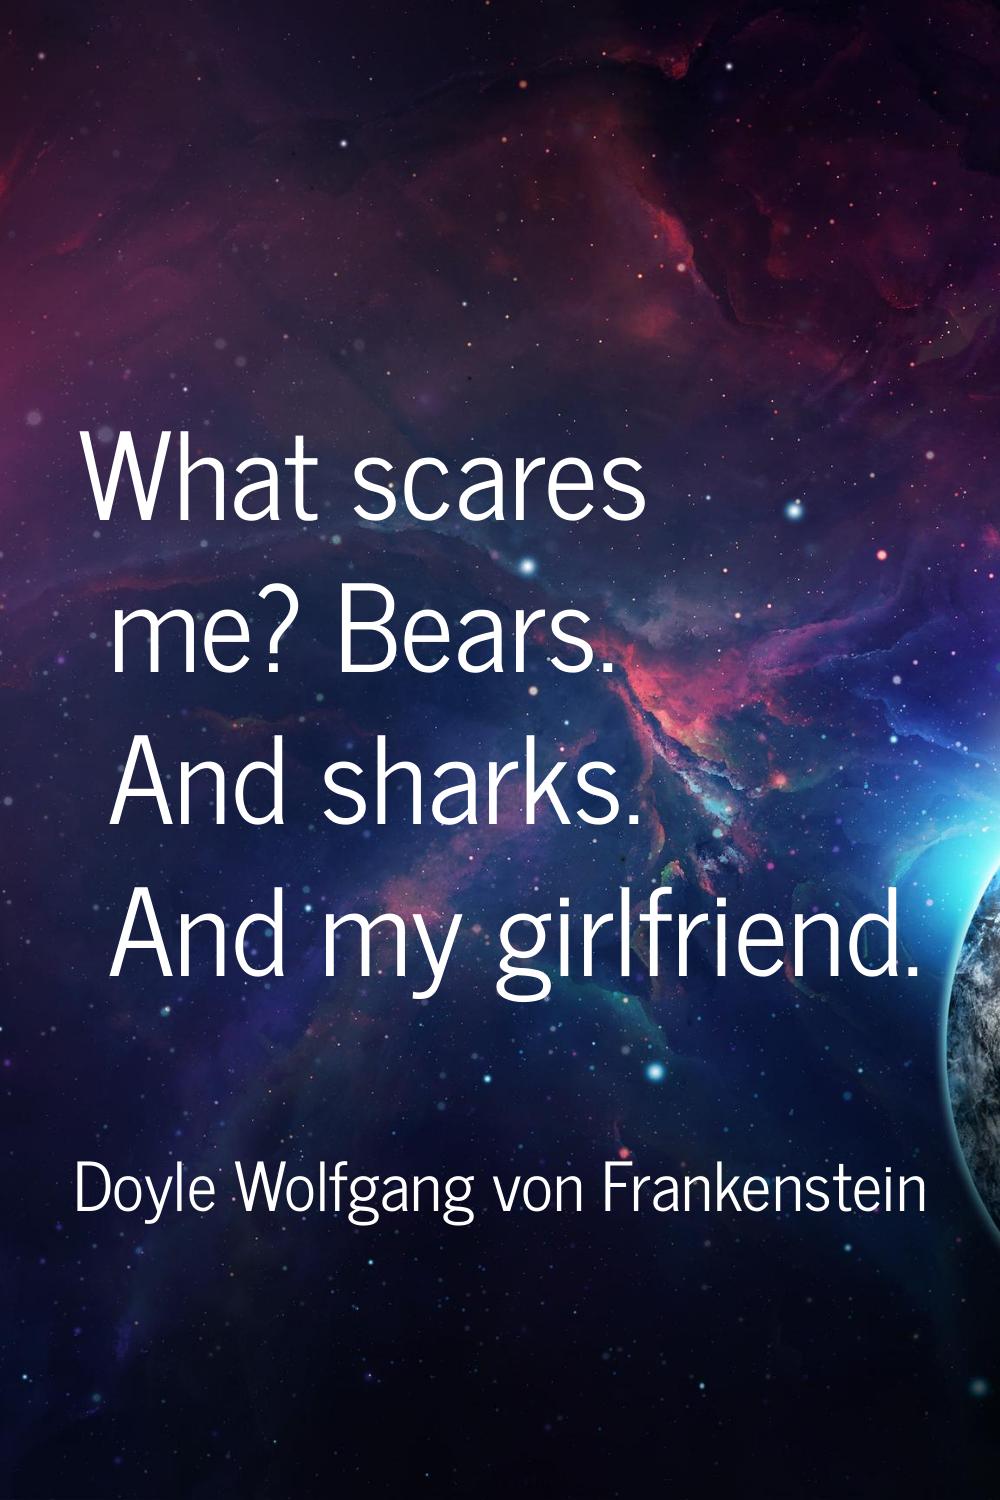 What scares me? Bears. And sharks. And my girlfriend.